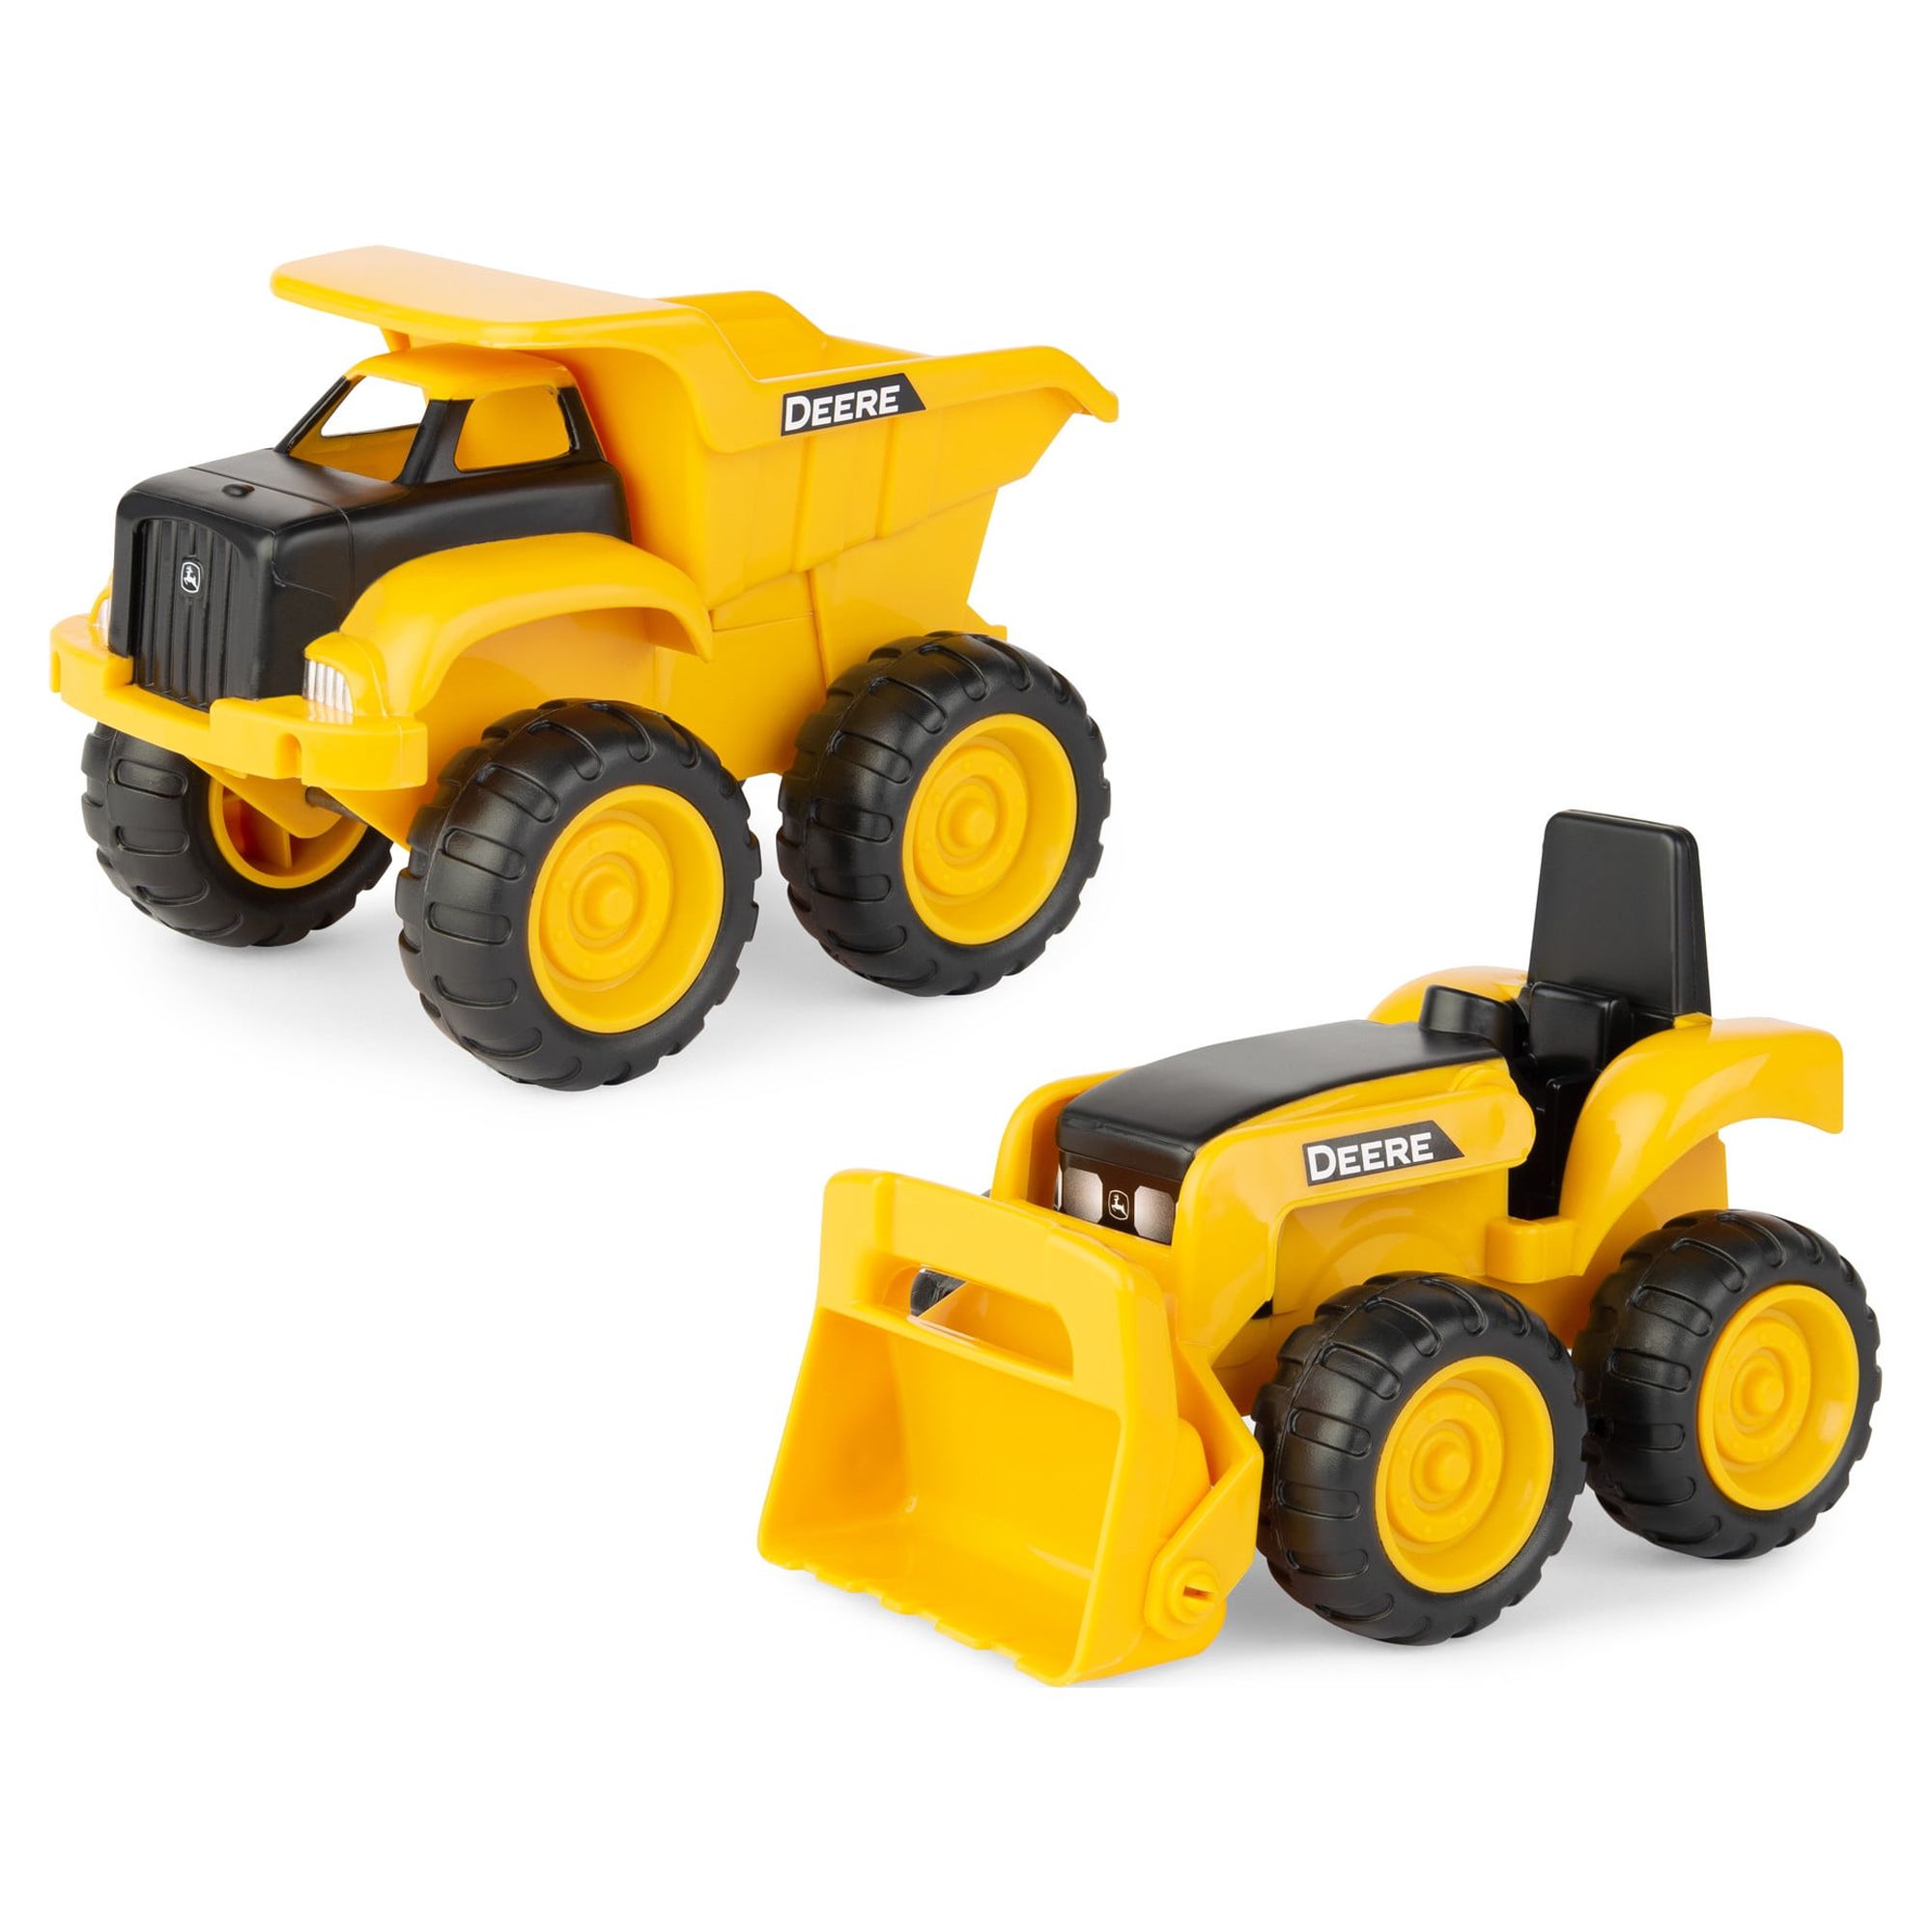 John Deere Sandbox 6" Construction Vehicle 2 Pack, Dump Truck & Tractor with Loader, Yellow - image 1 of 13